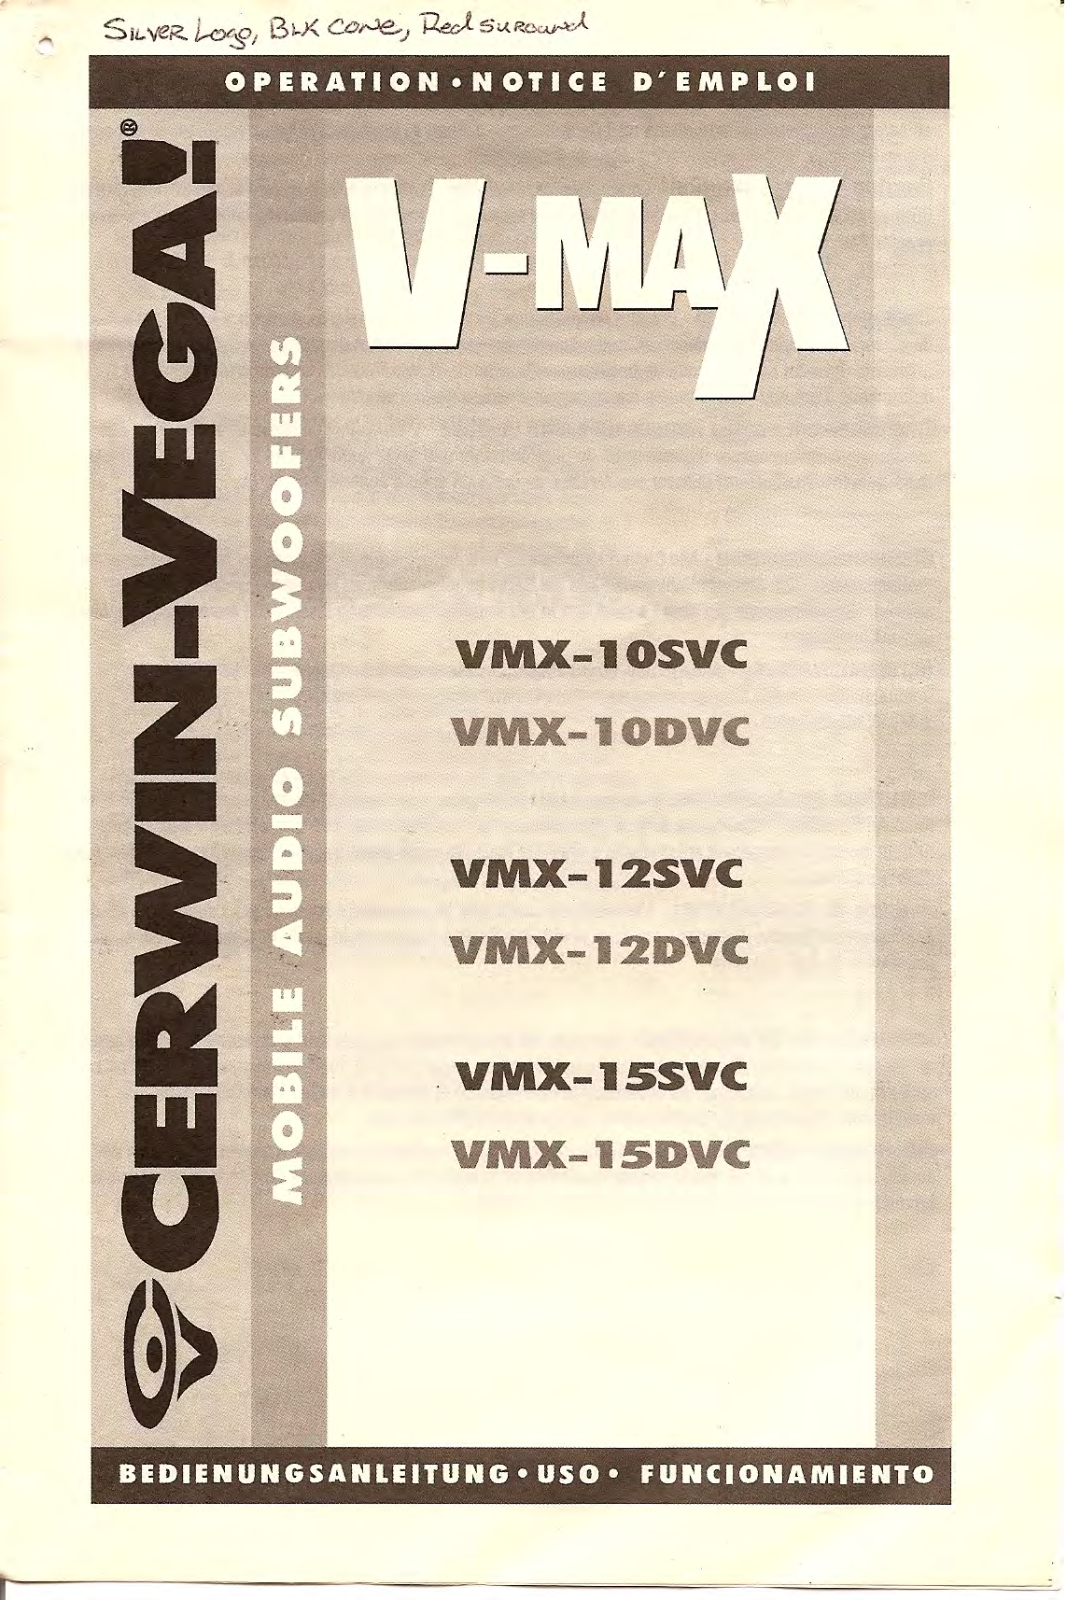 Cerwin Vega VMX-10SVC, VMX-10DVC, VMX-12SVC, VMX-12DVC, VMX-15SVC Owners Manual